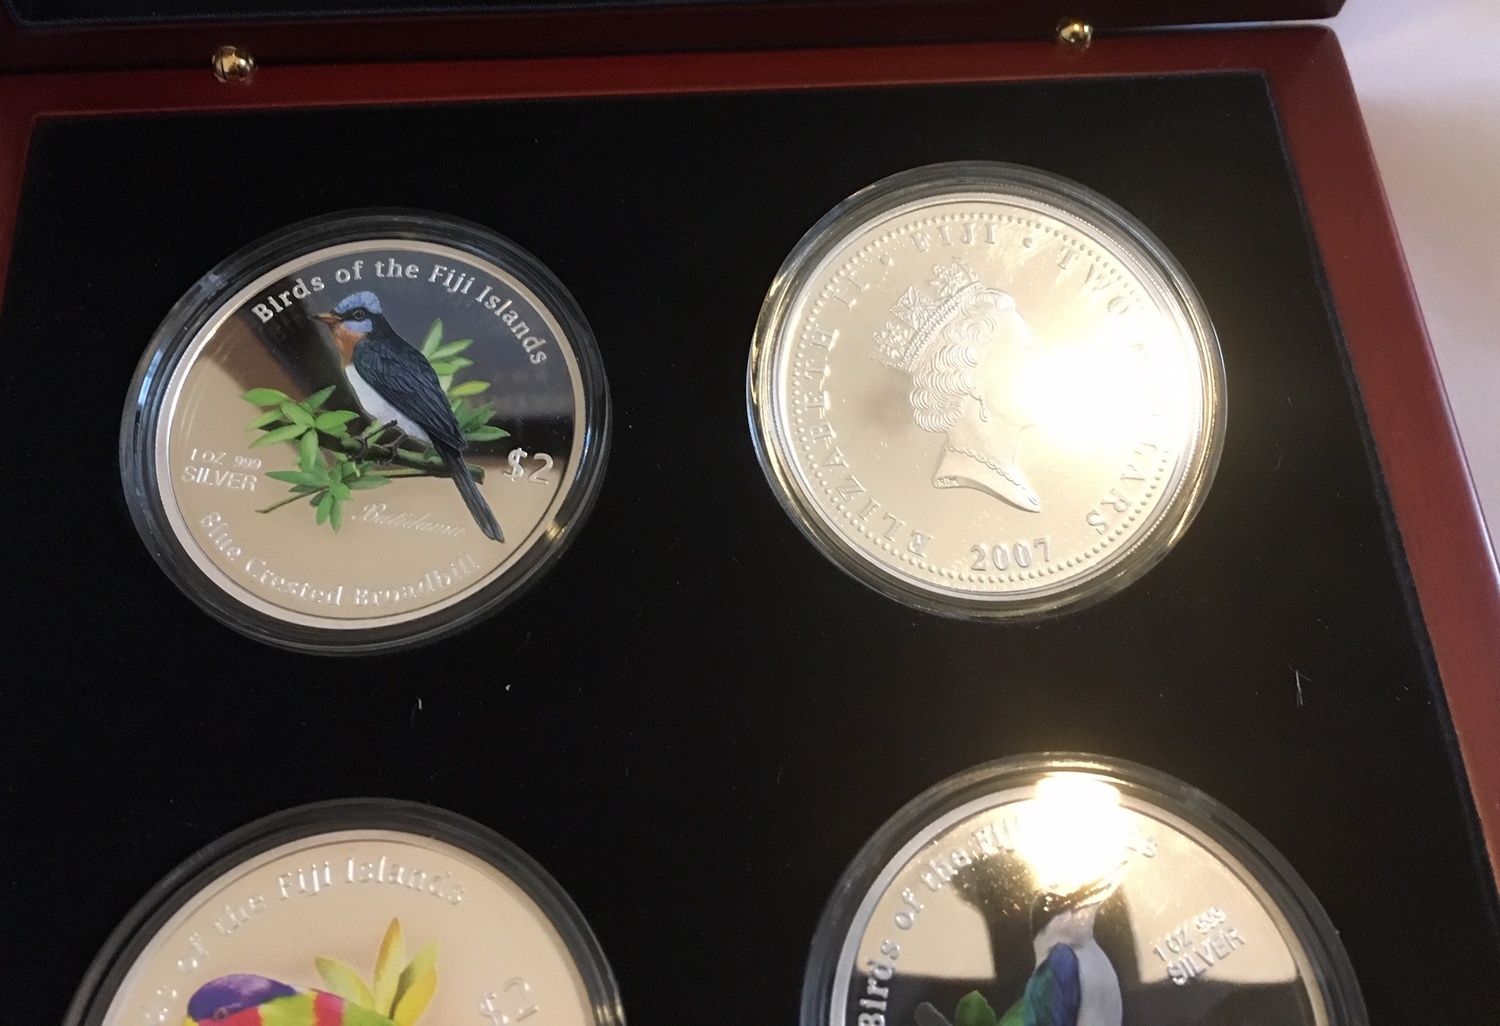 New Zealand Mint Birds of the Fiji Islands 4 x 1oz Silver Coins Set No 0206. - Image 5 of 7